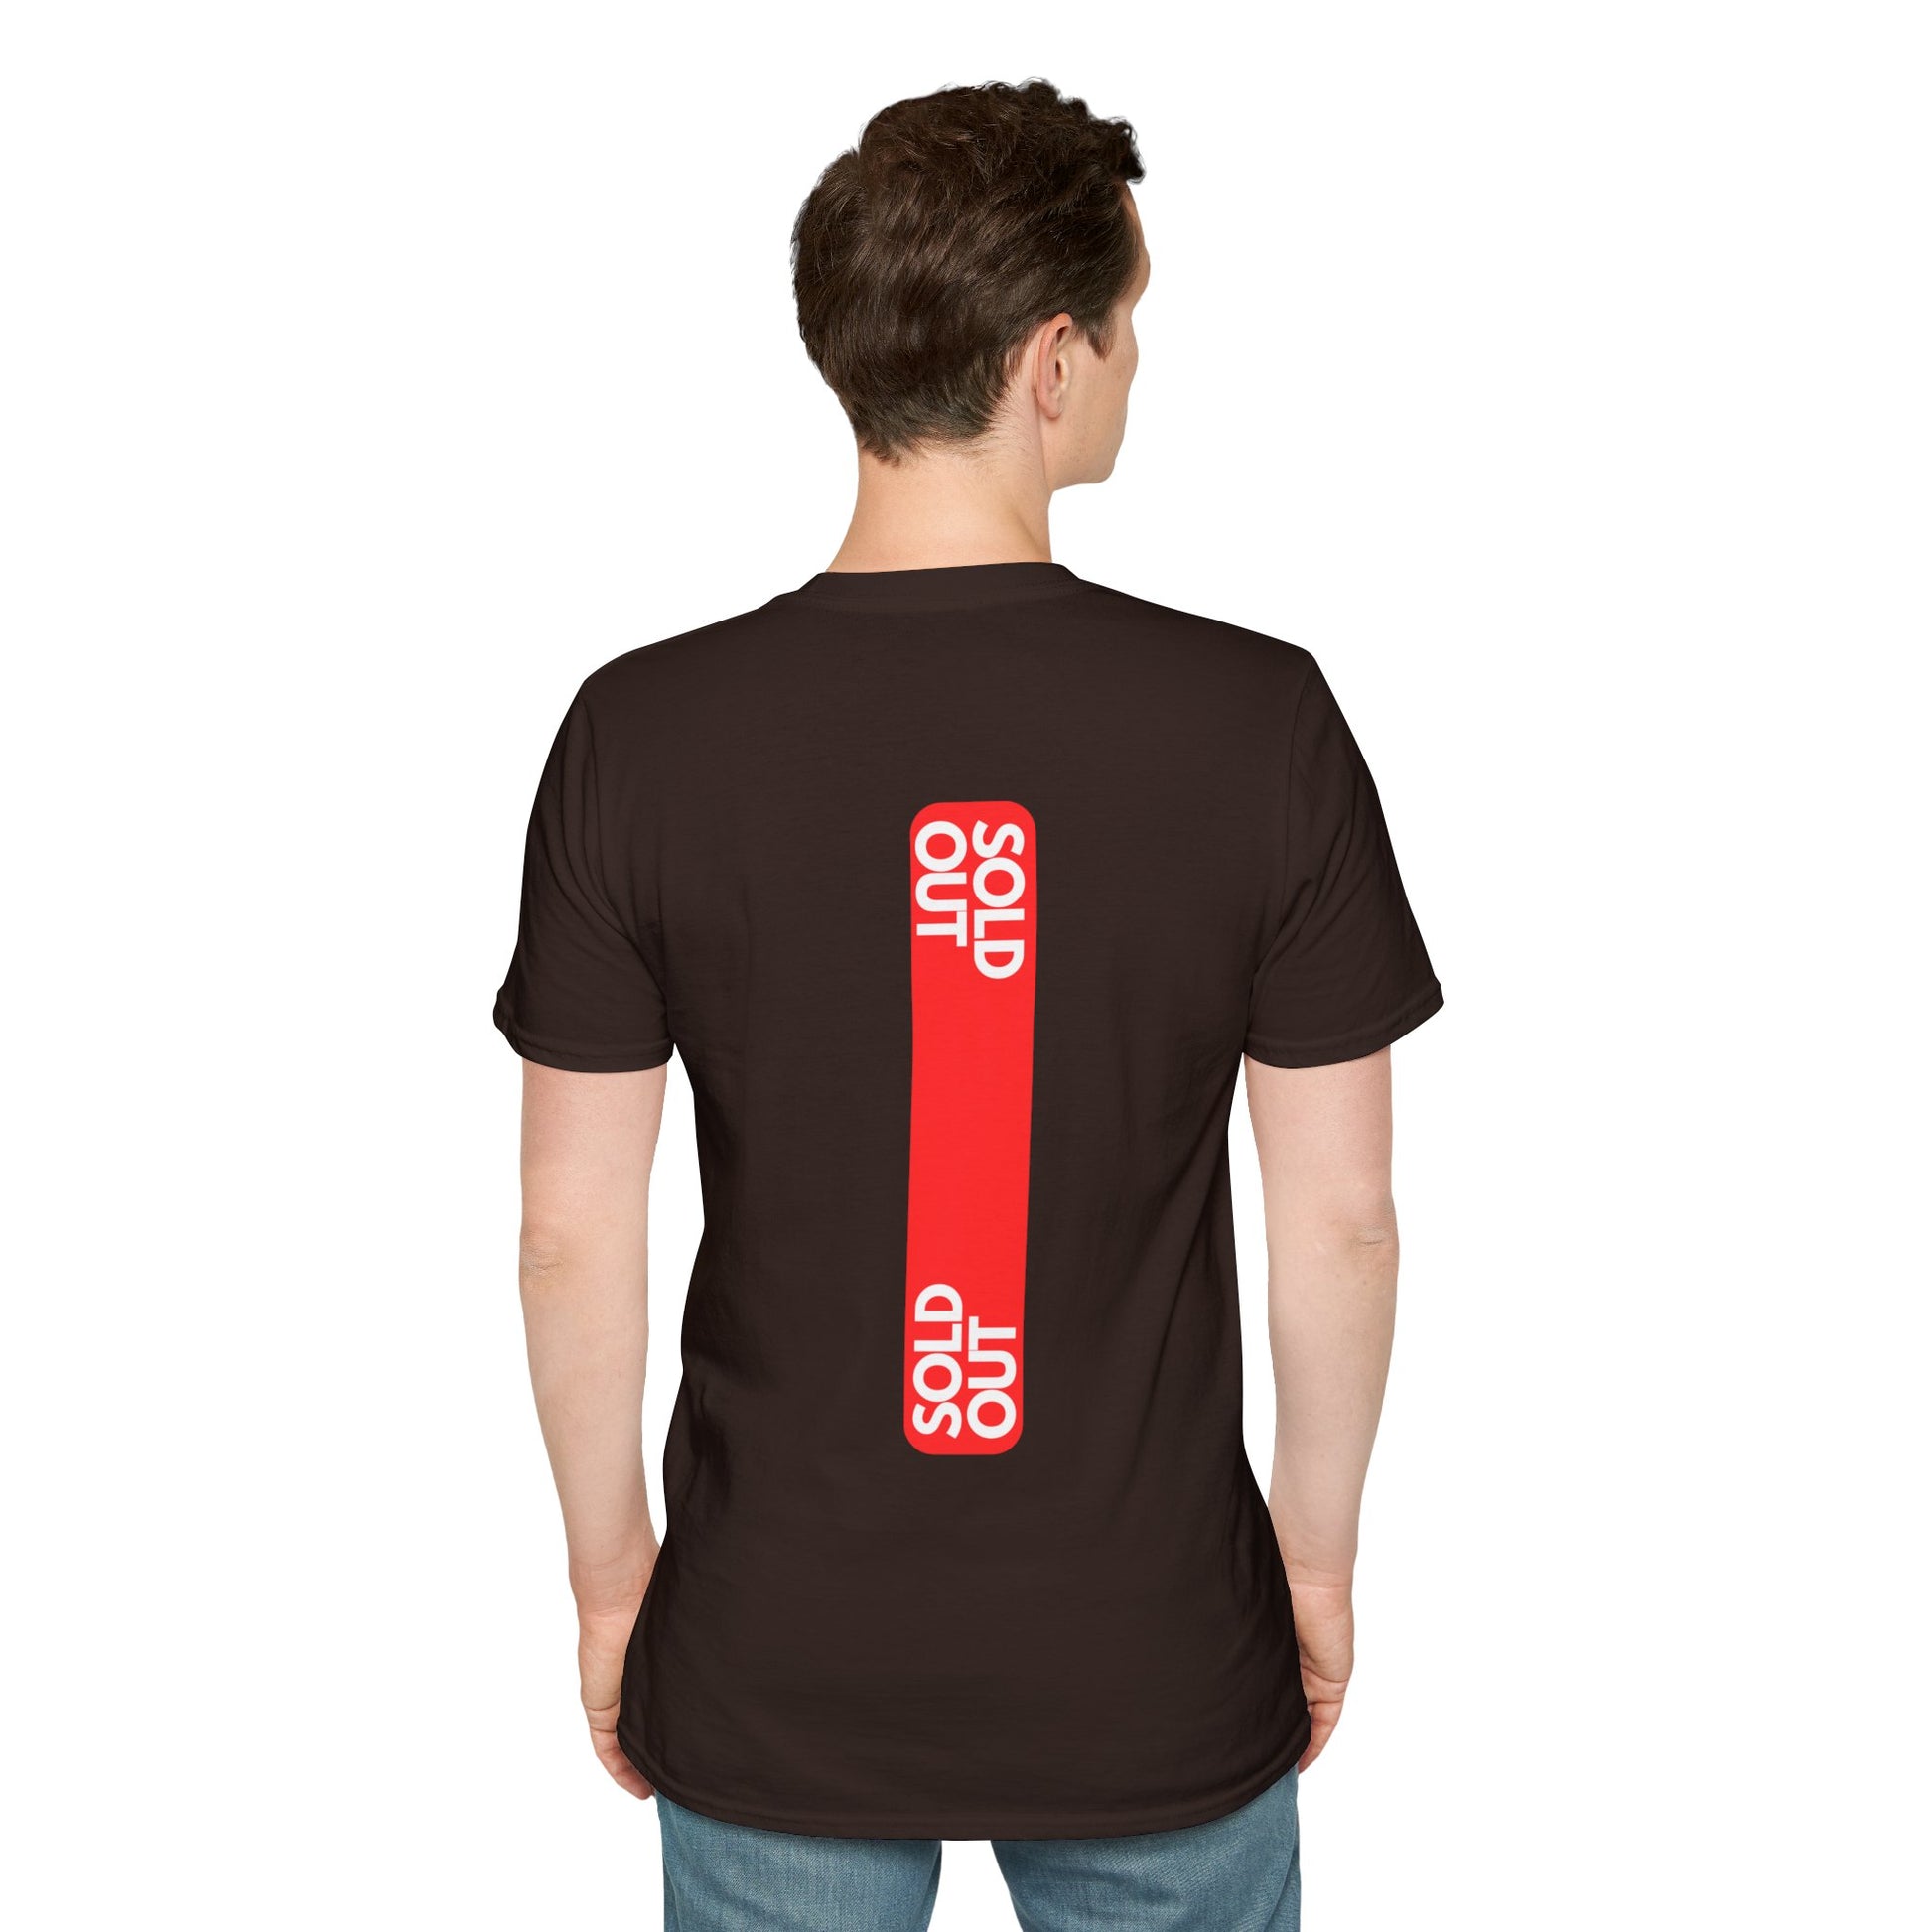 Brown T-shirt with a striking red tag design and the text ‘SOLD OUT’ in bold letters